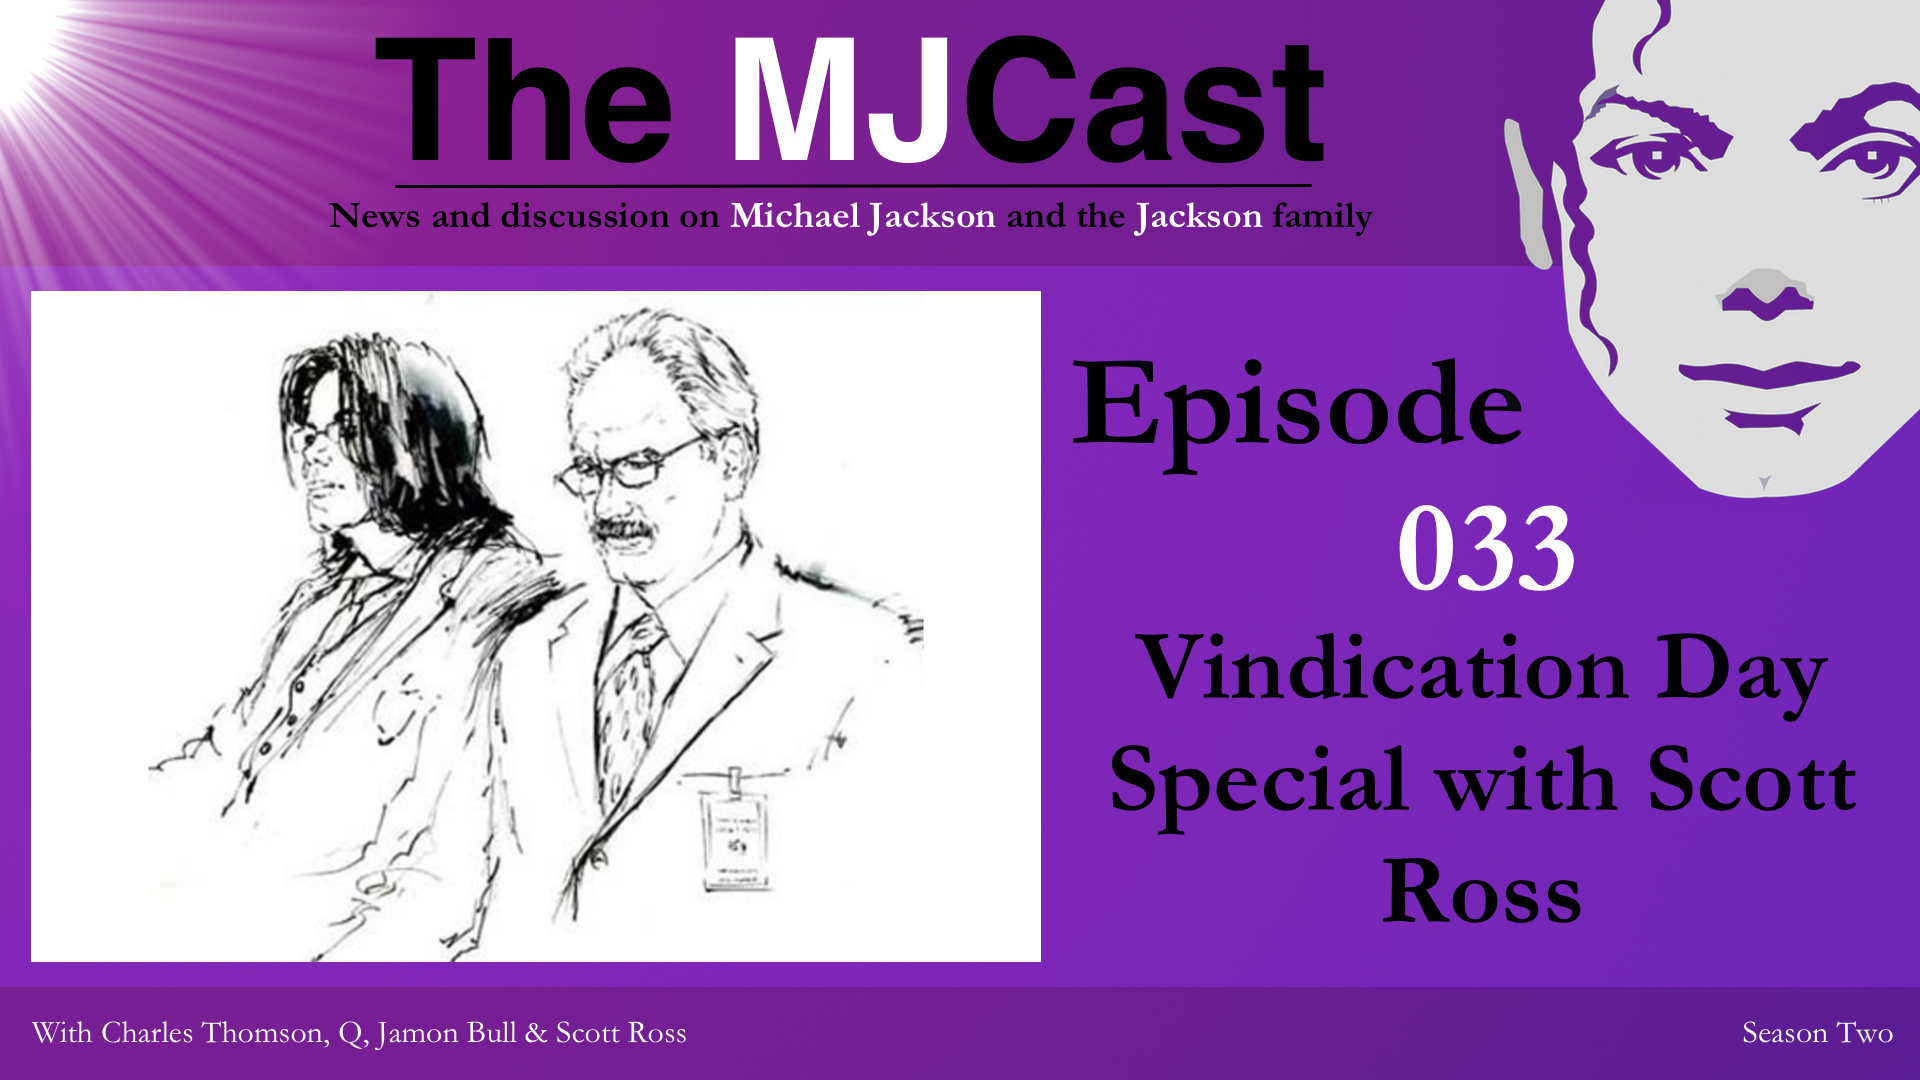 Episode 033 - Vindication Day Special with Scott Ross Show Art